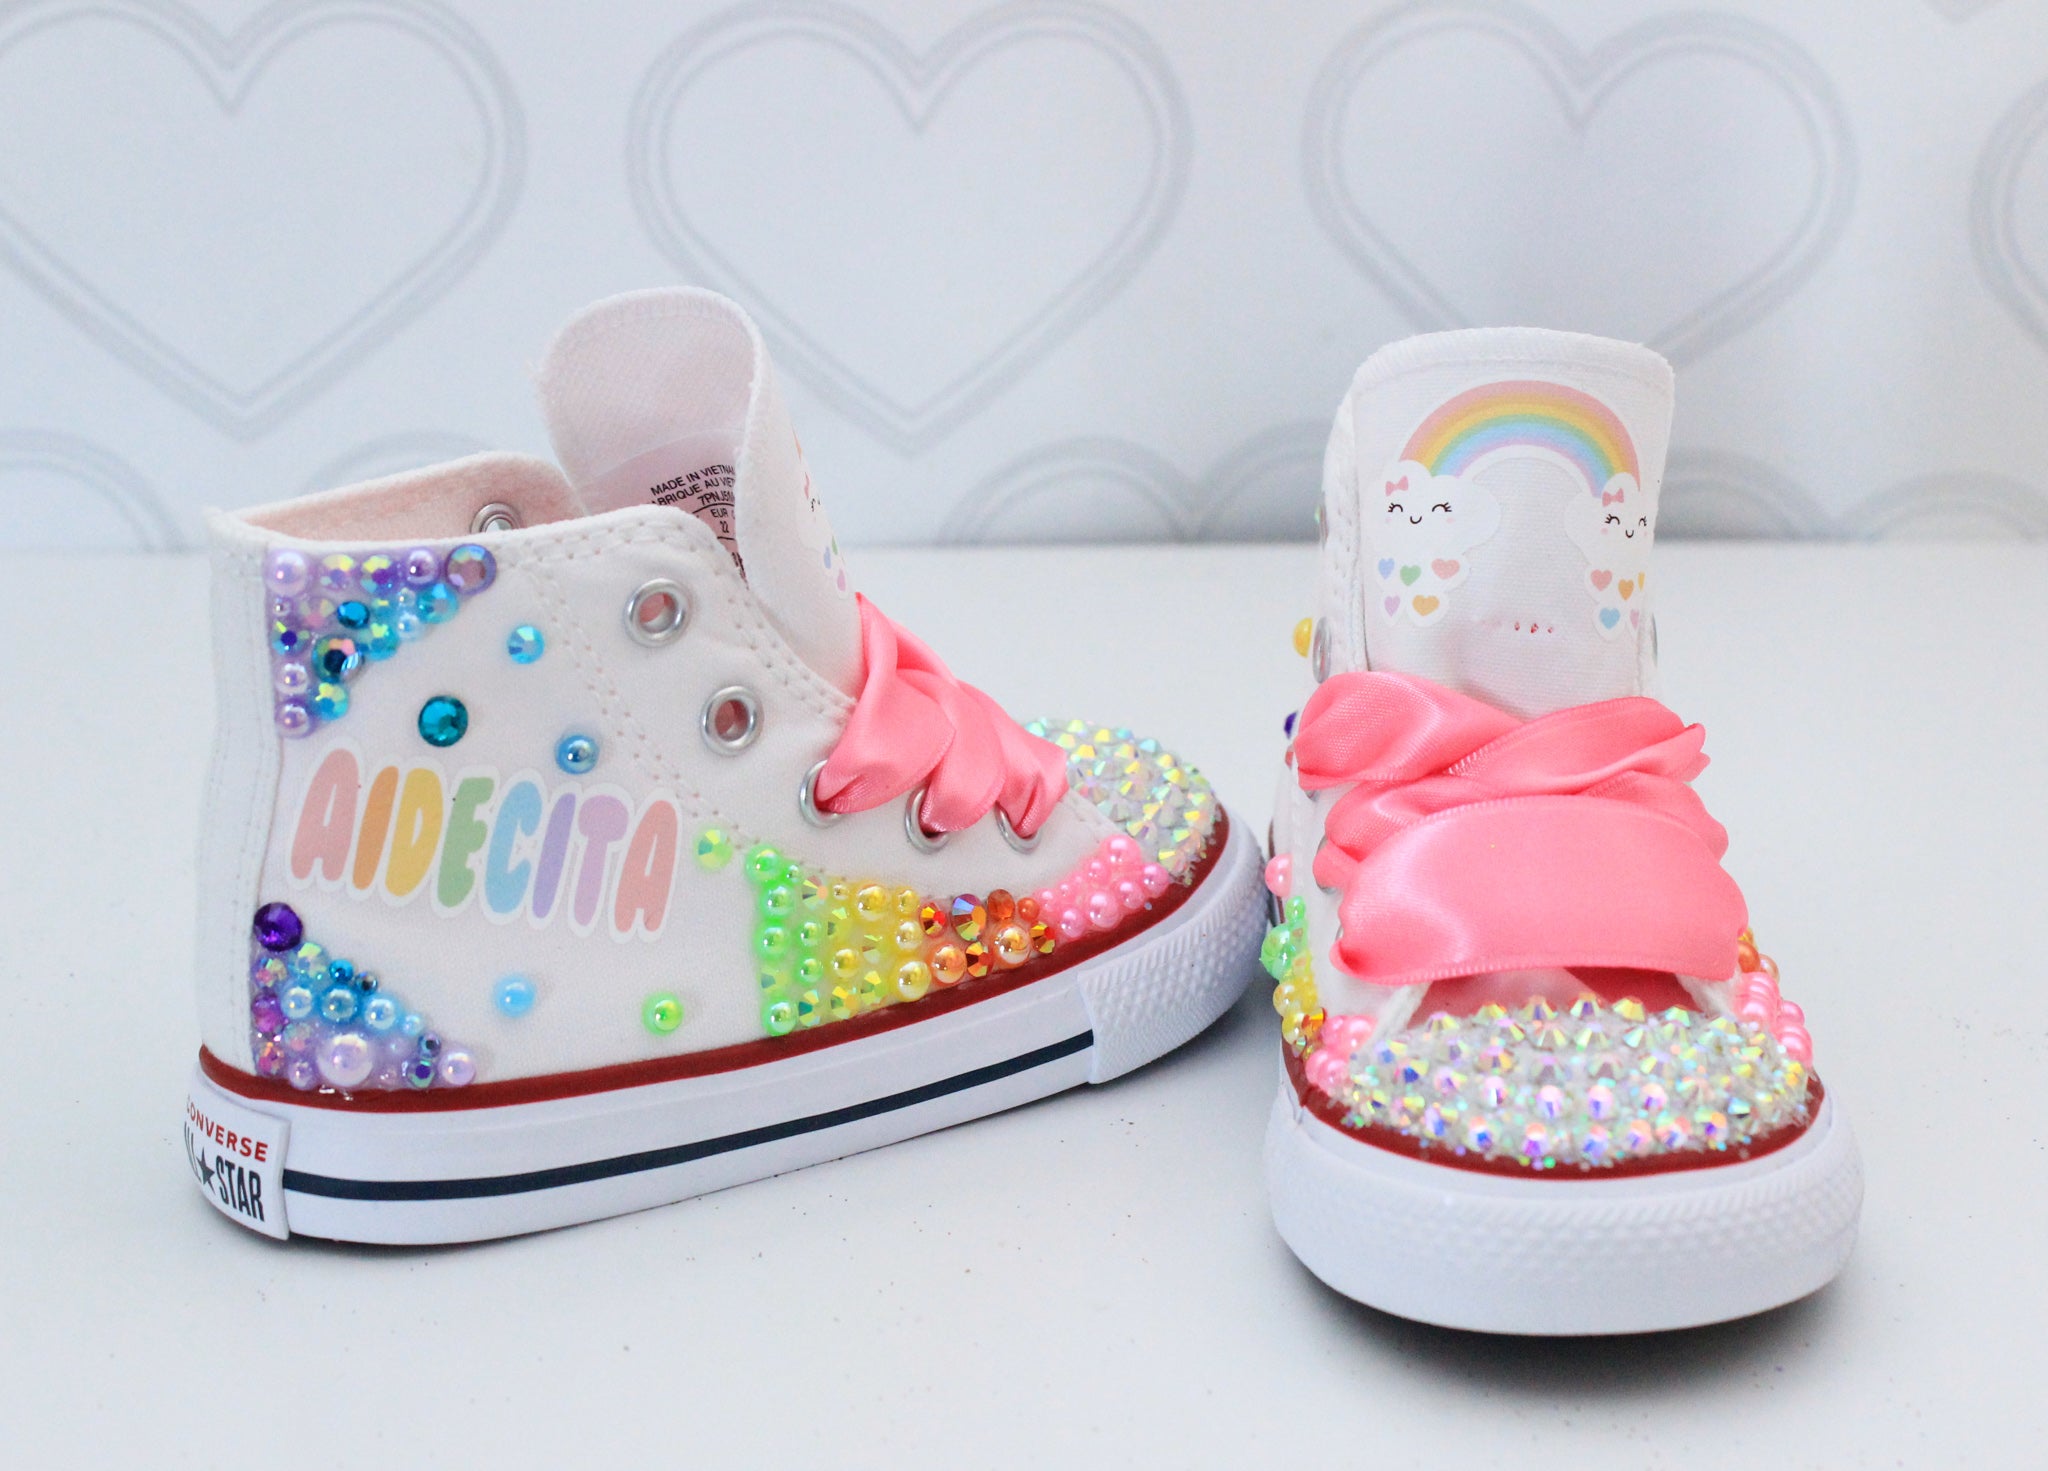 Rainbow and clouds shoes- Rainbow and clouds bling Converse-Girls Rainbow and clouds Shoes-Rainbow and clouds Converse